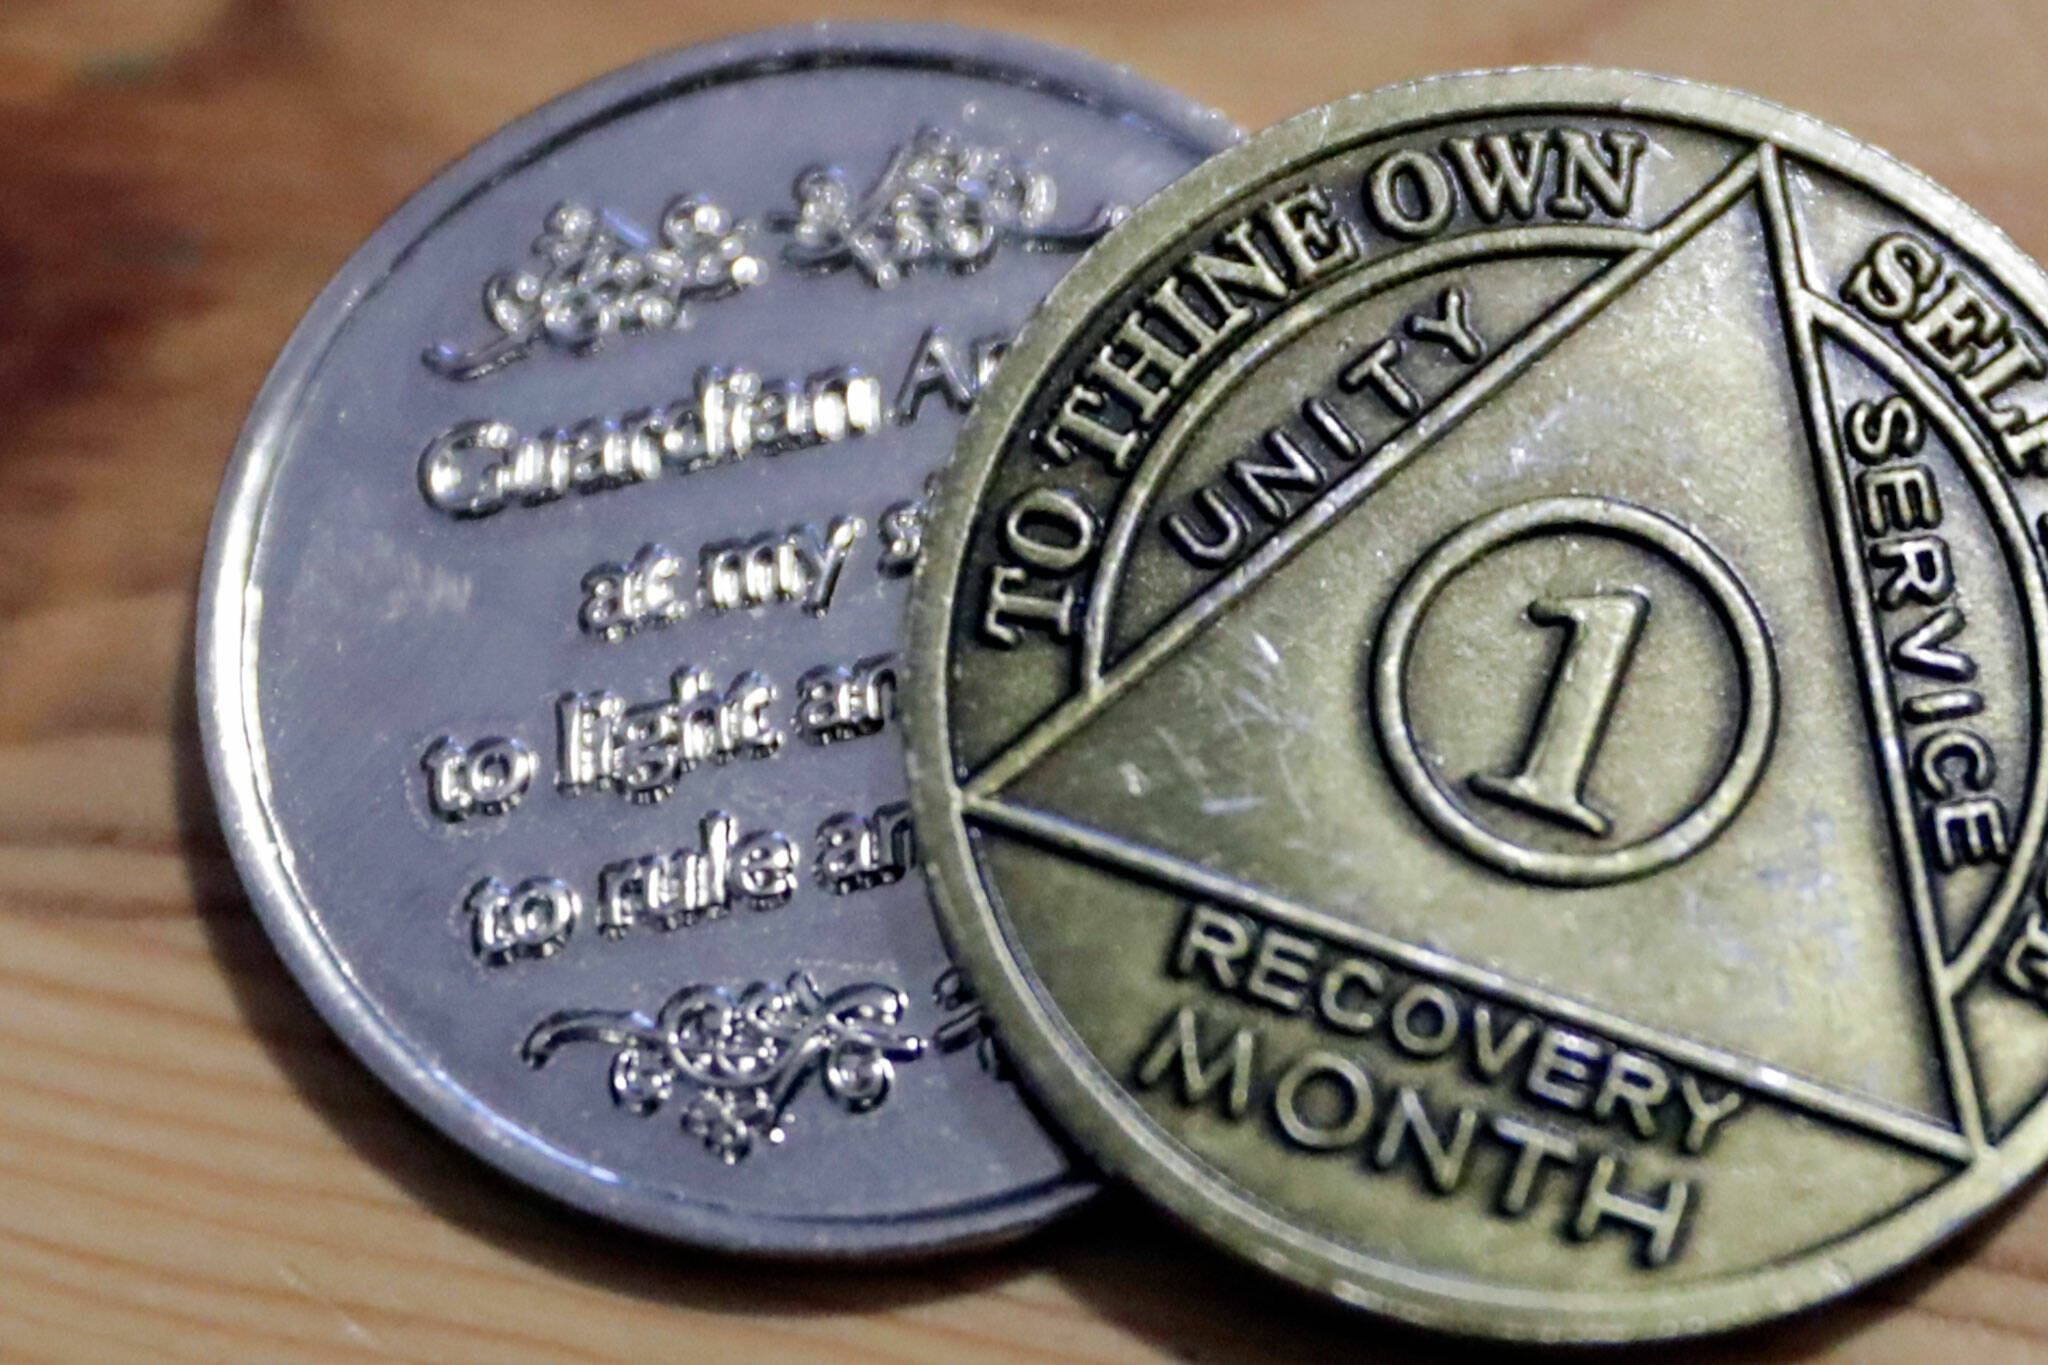 Randy Tharp’s recovery coins, which he received after battling fentanyl addiction. (Kevin Clark / The Herald)